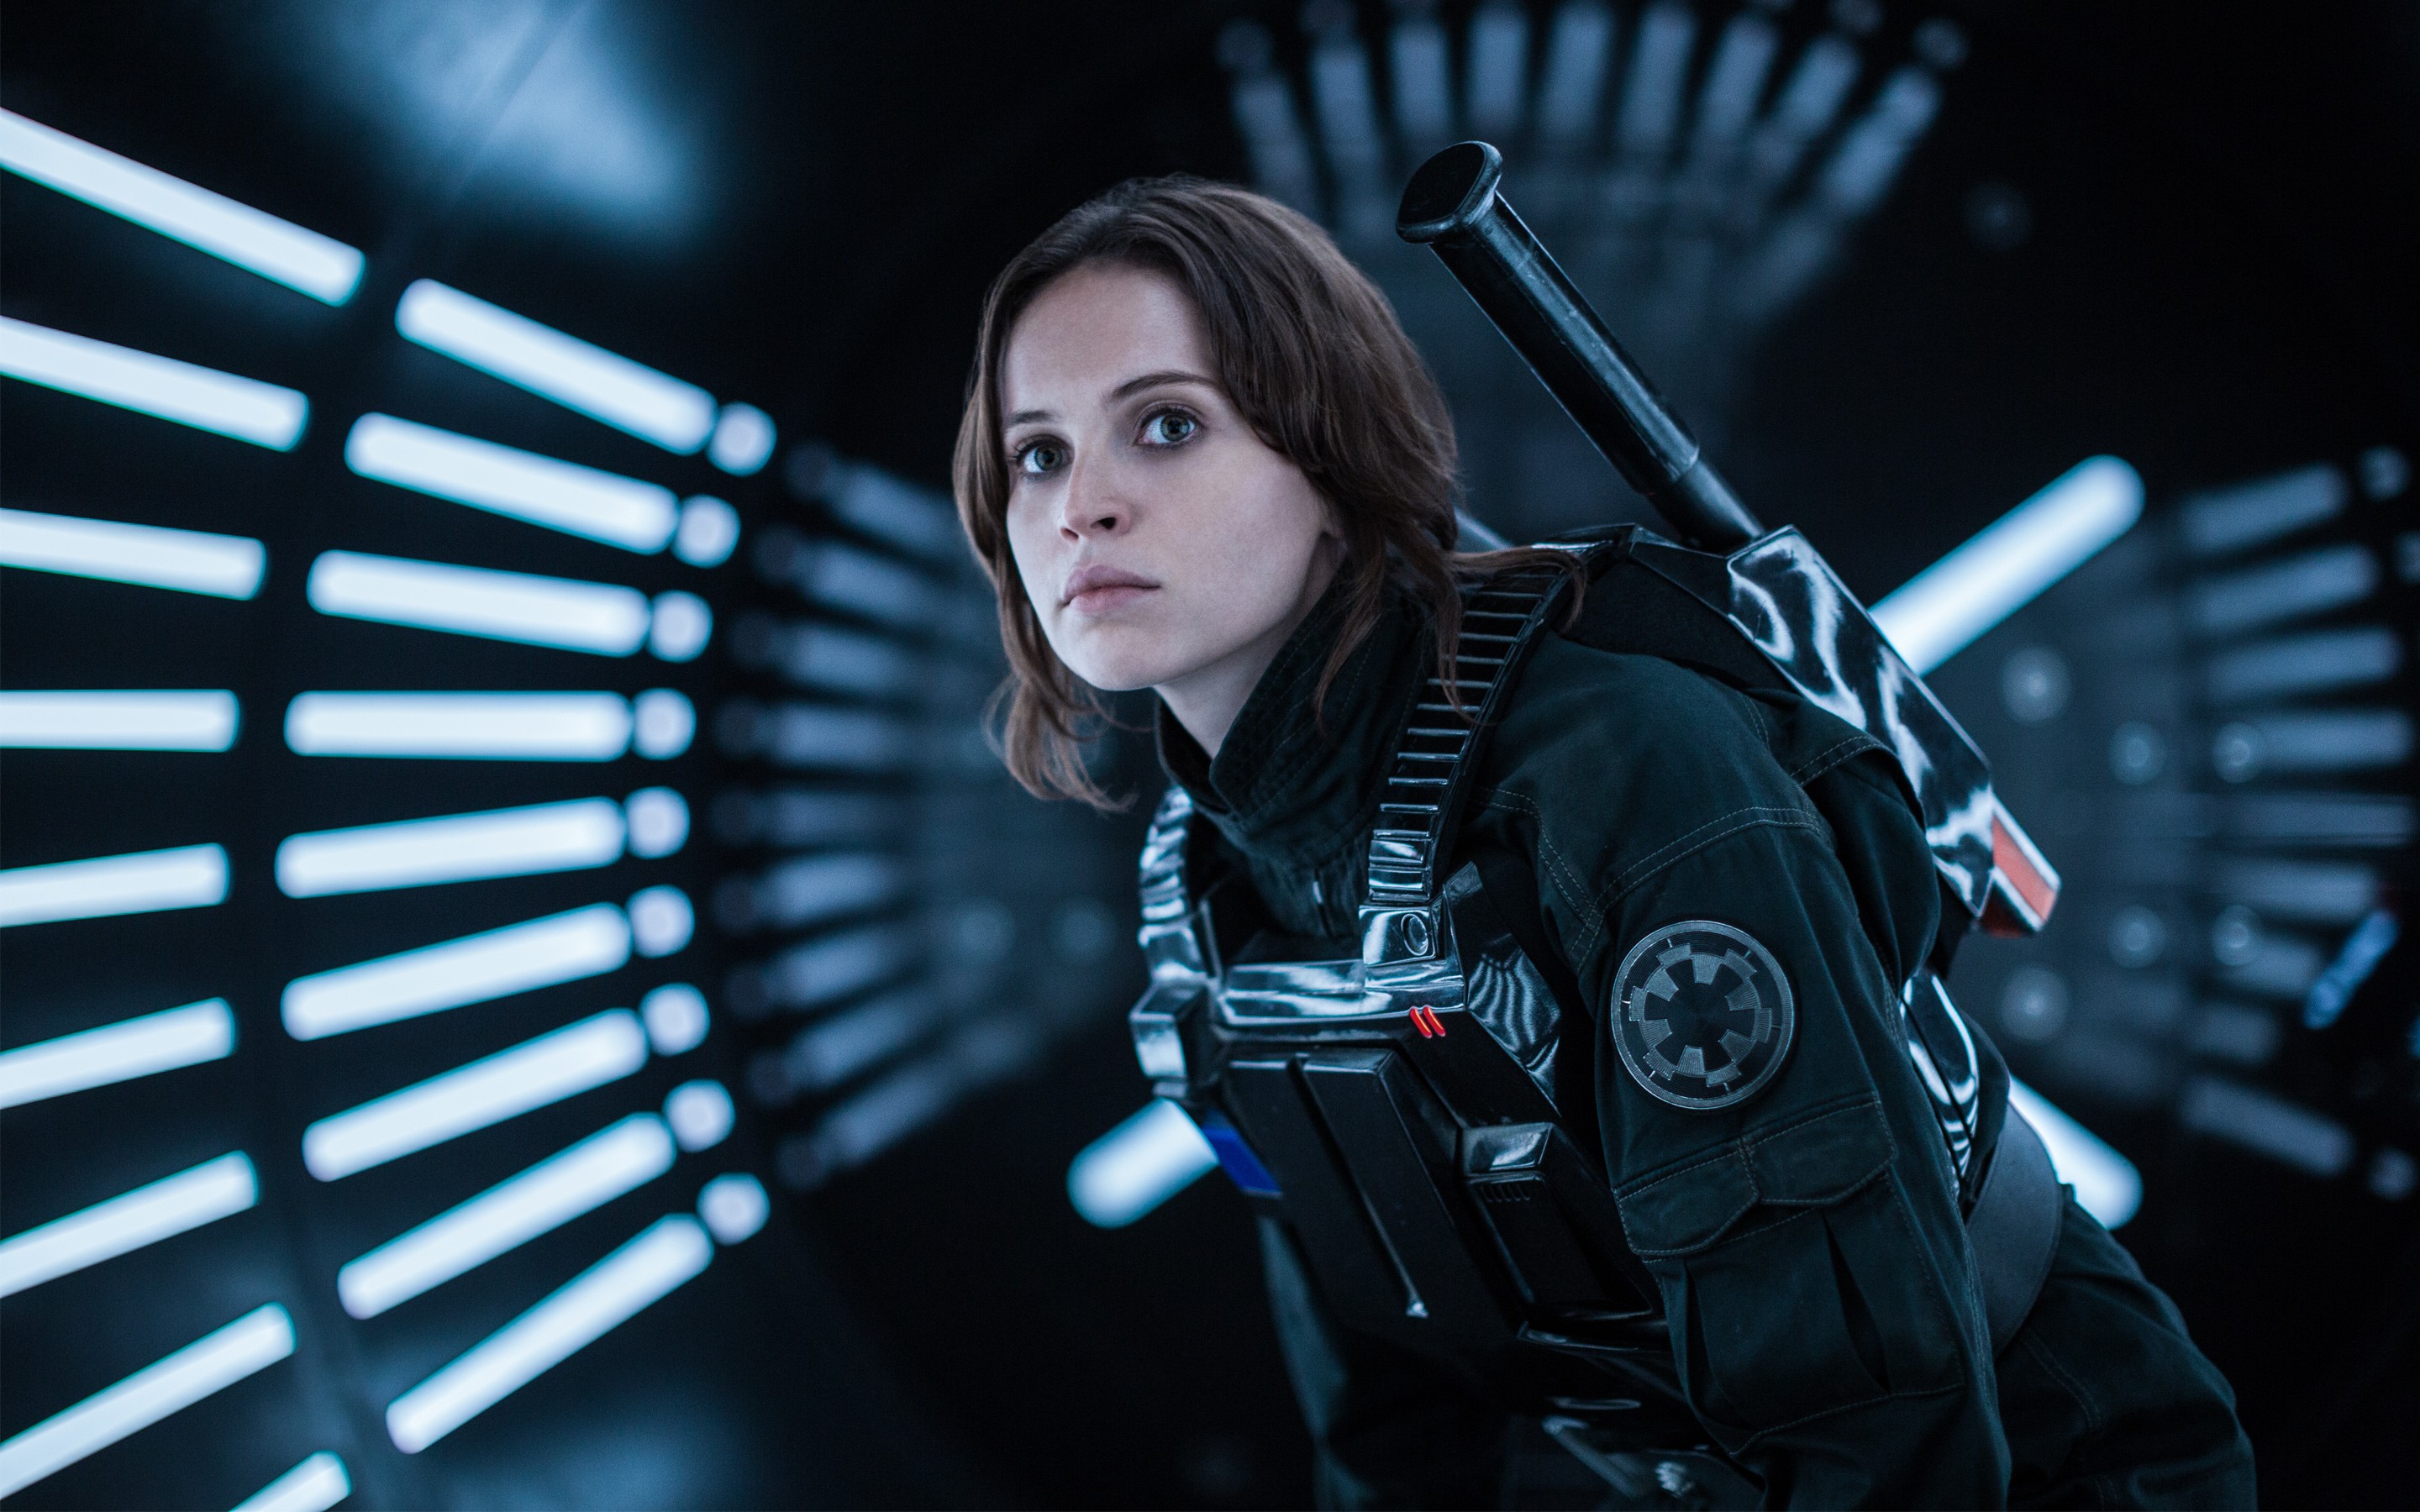 People 2880x1800 women Star Wars Rogue One: A Star Wars Story Felicity Jones Jyn Erso movies movie characters actress